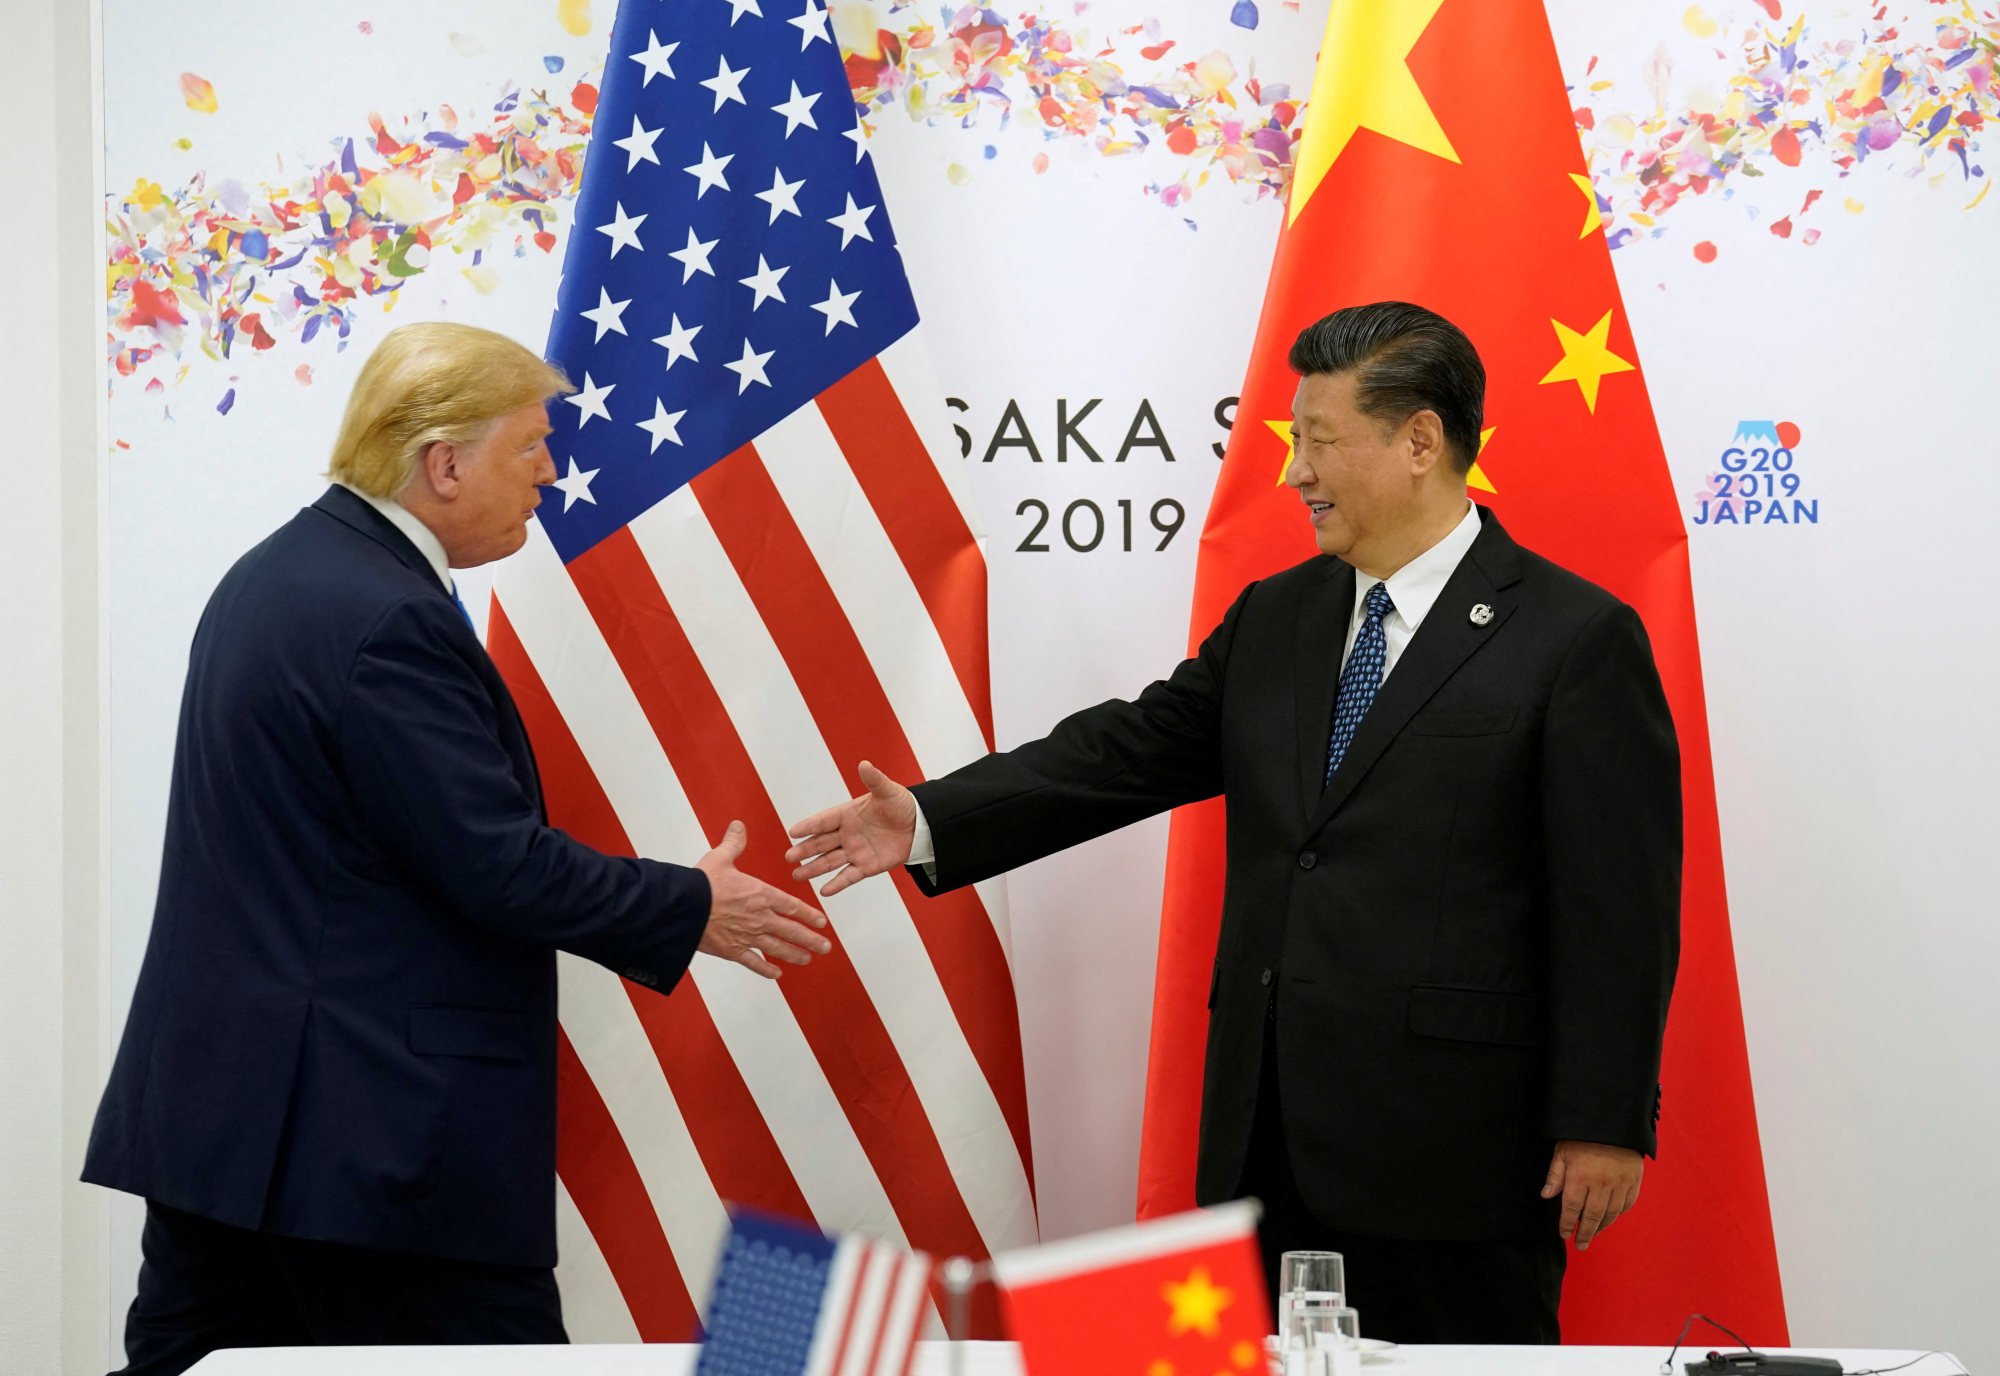 Trump would impose tariffs on China again if re-elected in November: ‘We have to do it’